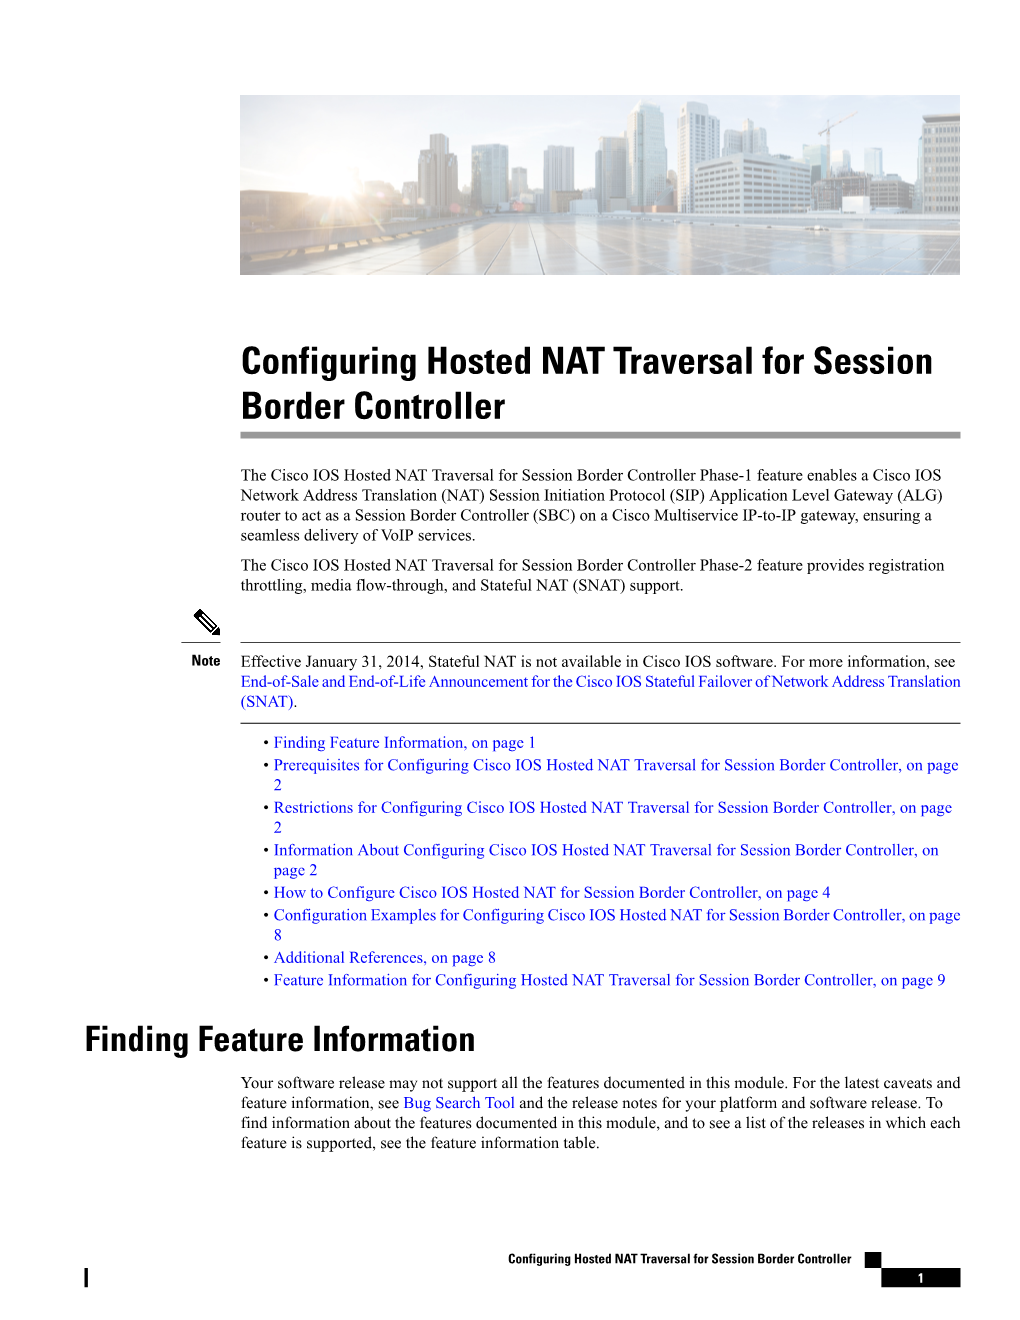 Configuring Hosted NAT Traversal for Session Border Controller